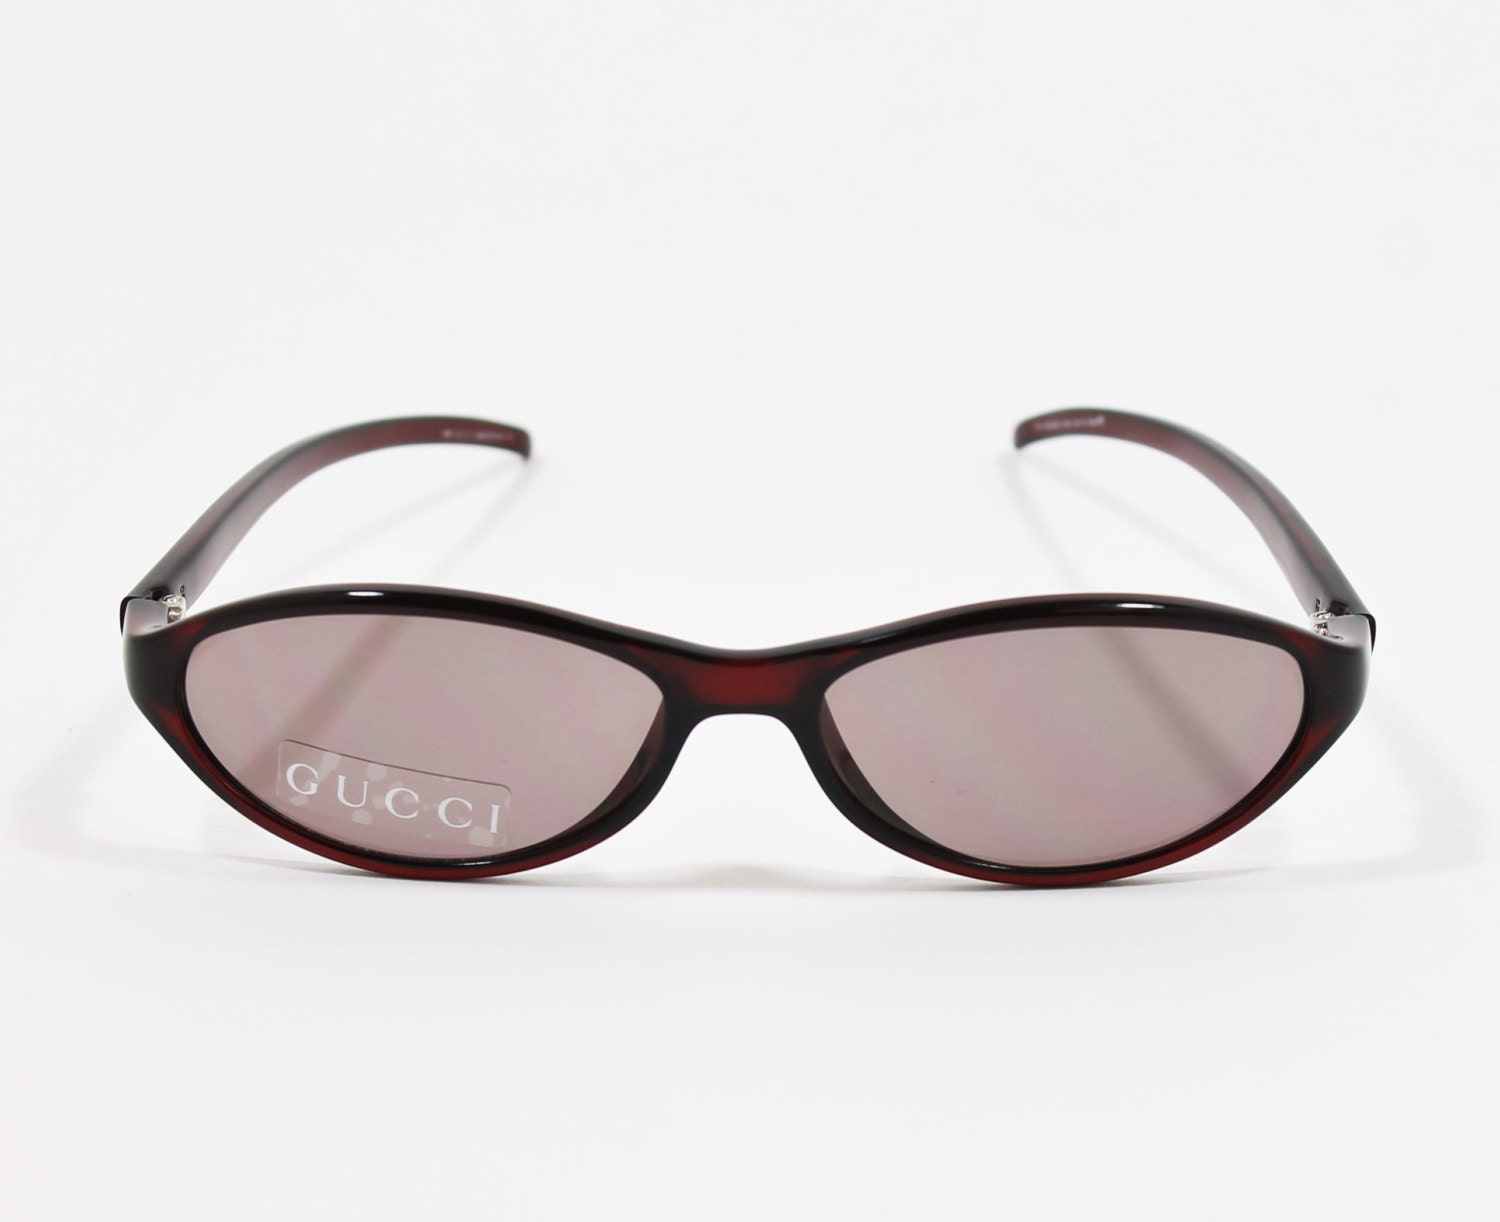 Gucci Sunglasses GG 2497/S 3h6 53-15-130 Made in Italy